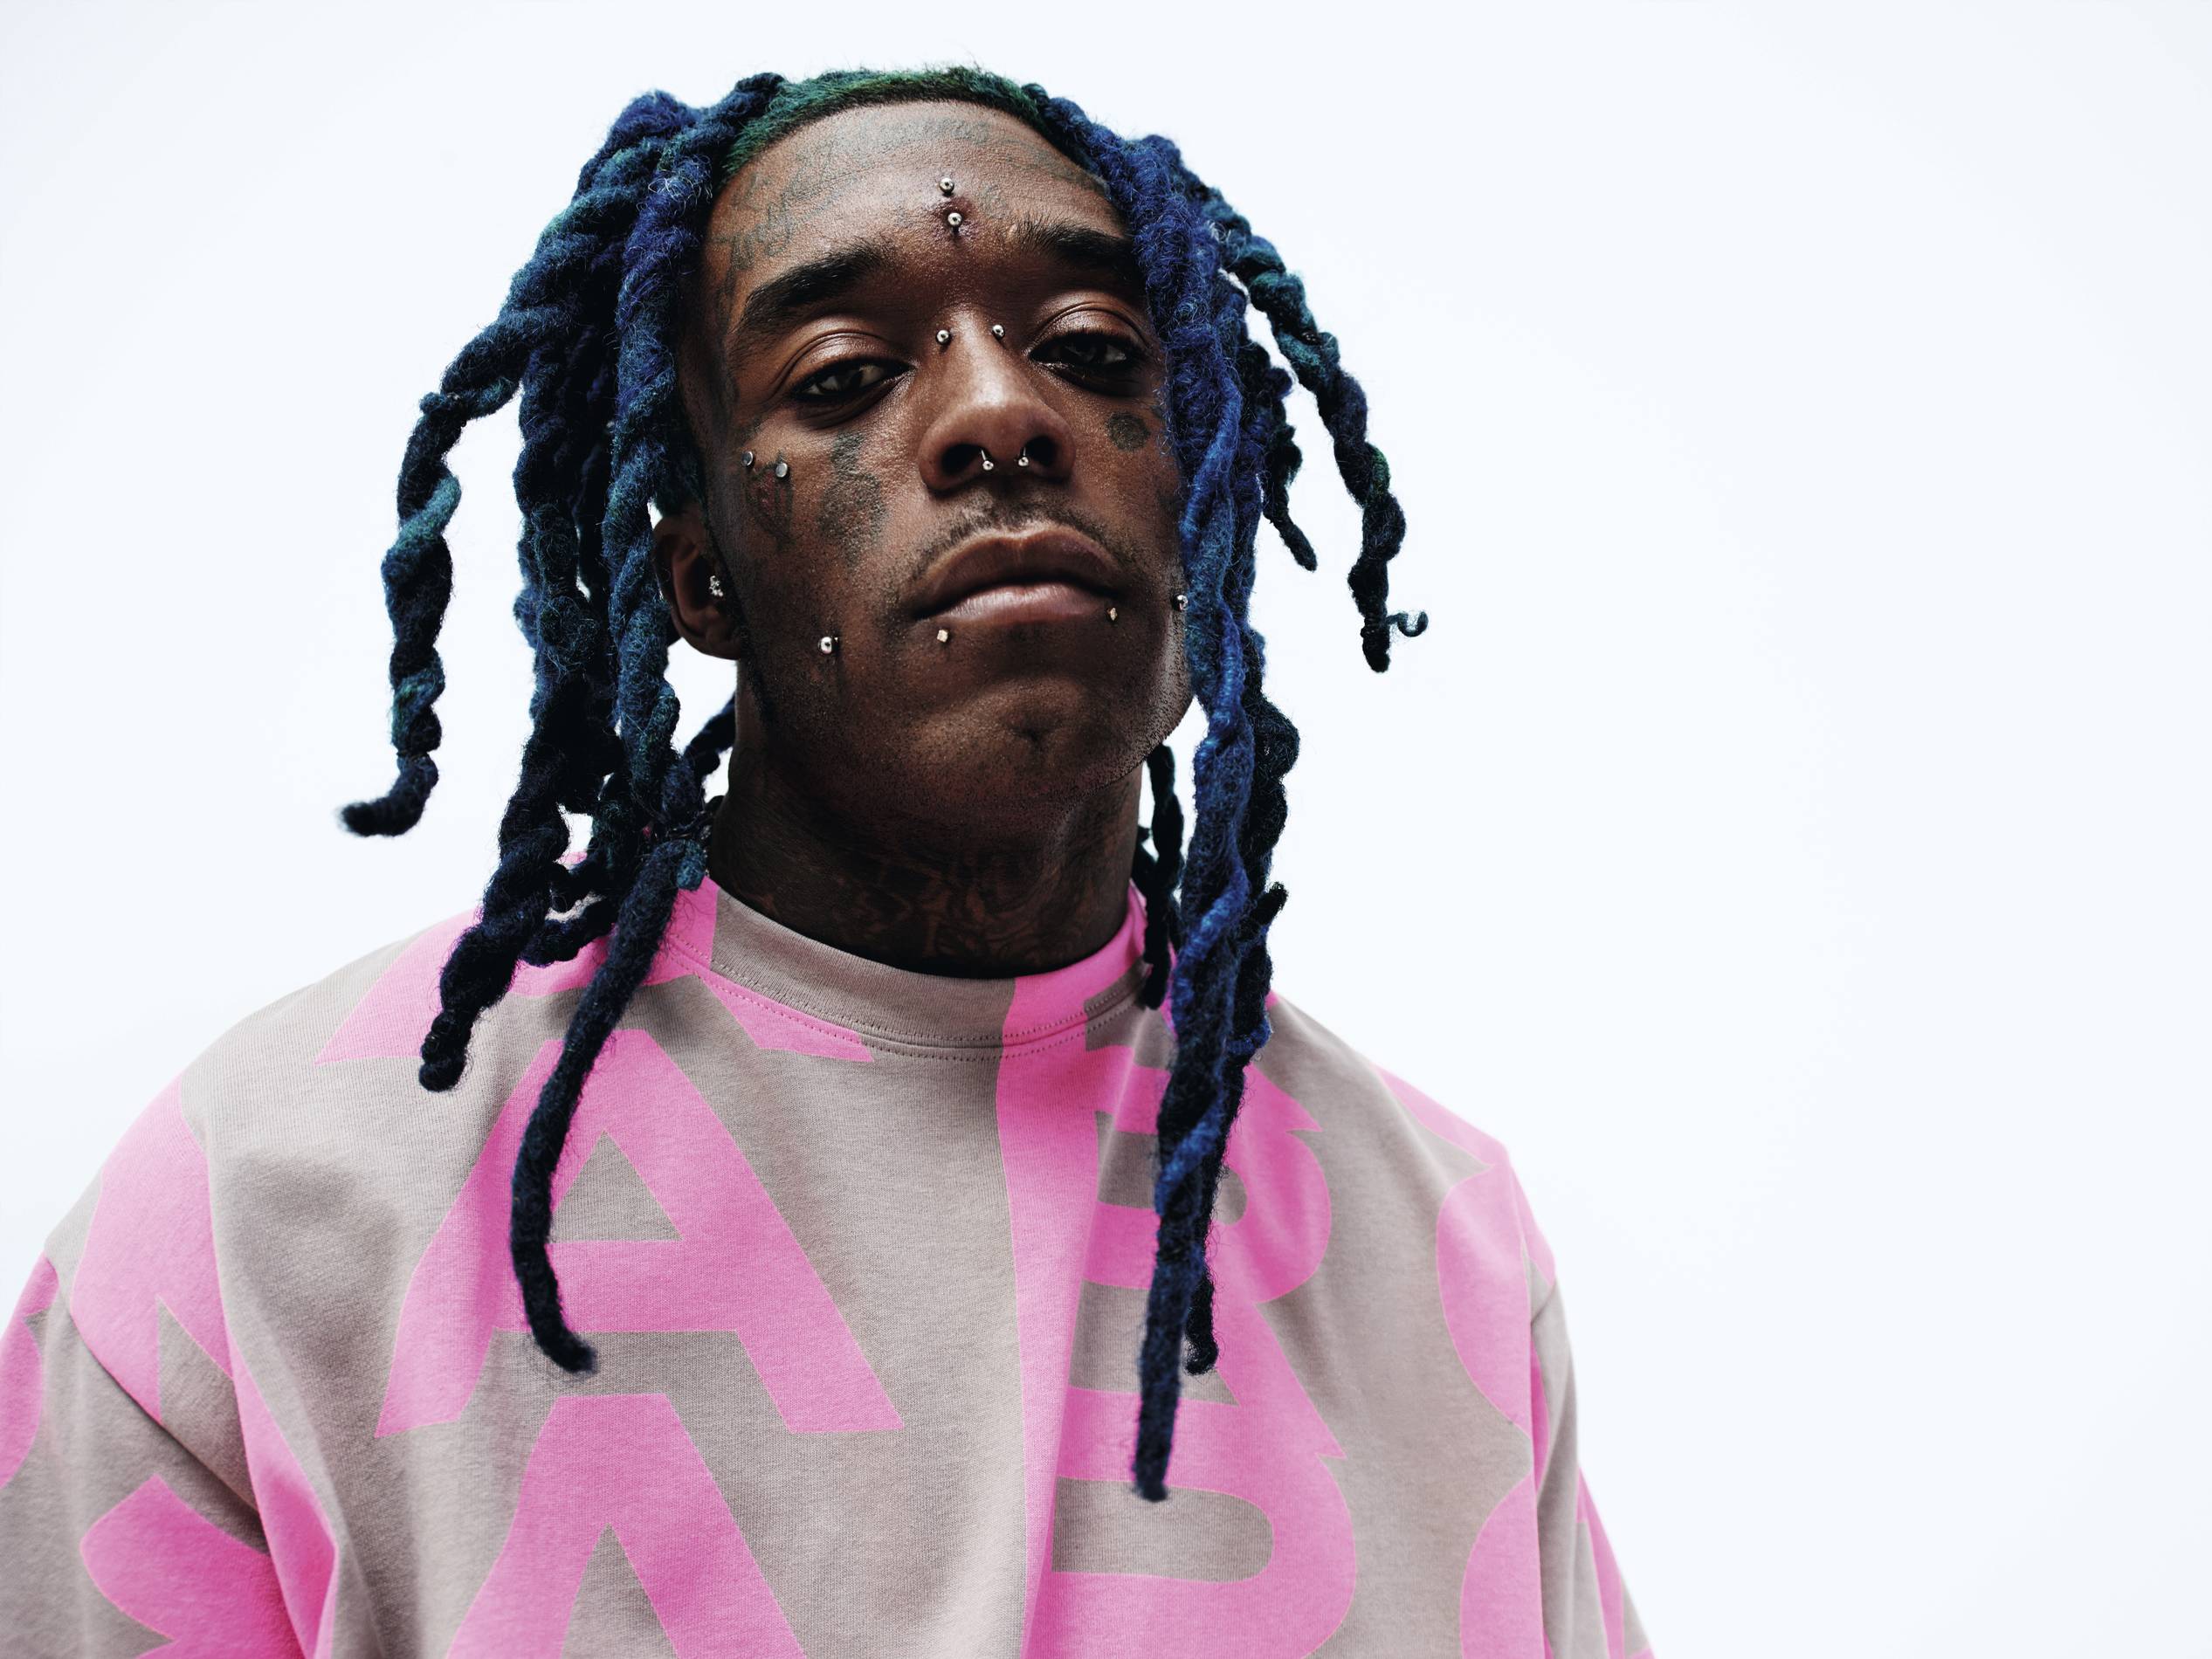 Lil Uzi Vert poses for Marc Jacobs' Spring 2022 Campaign